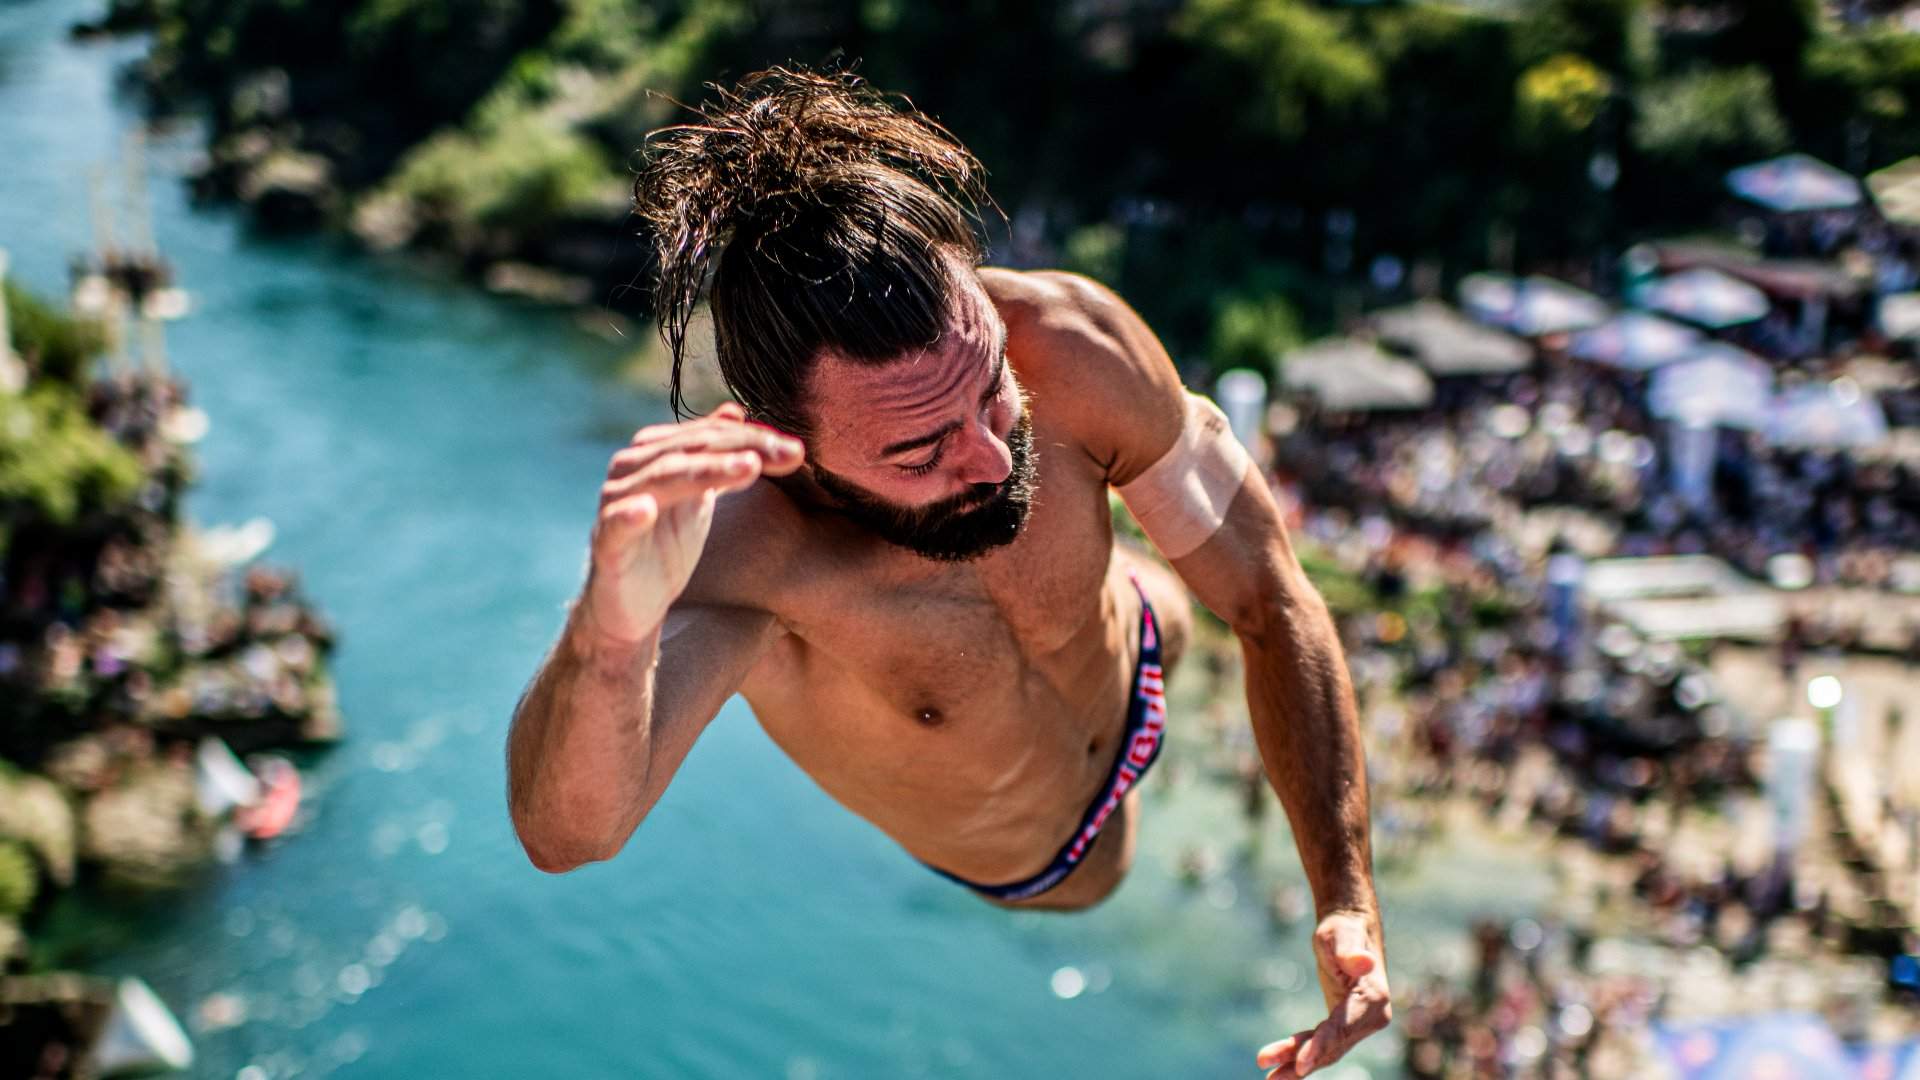 The Red Bull Cliff Diving World Series Is Splashing Into New Zealand for the First Time in November